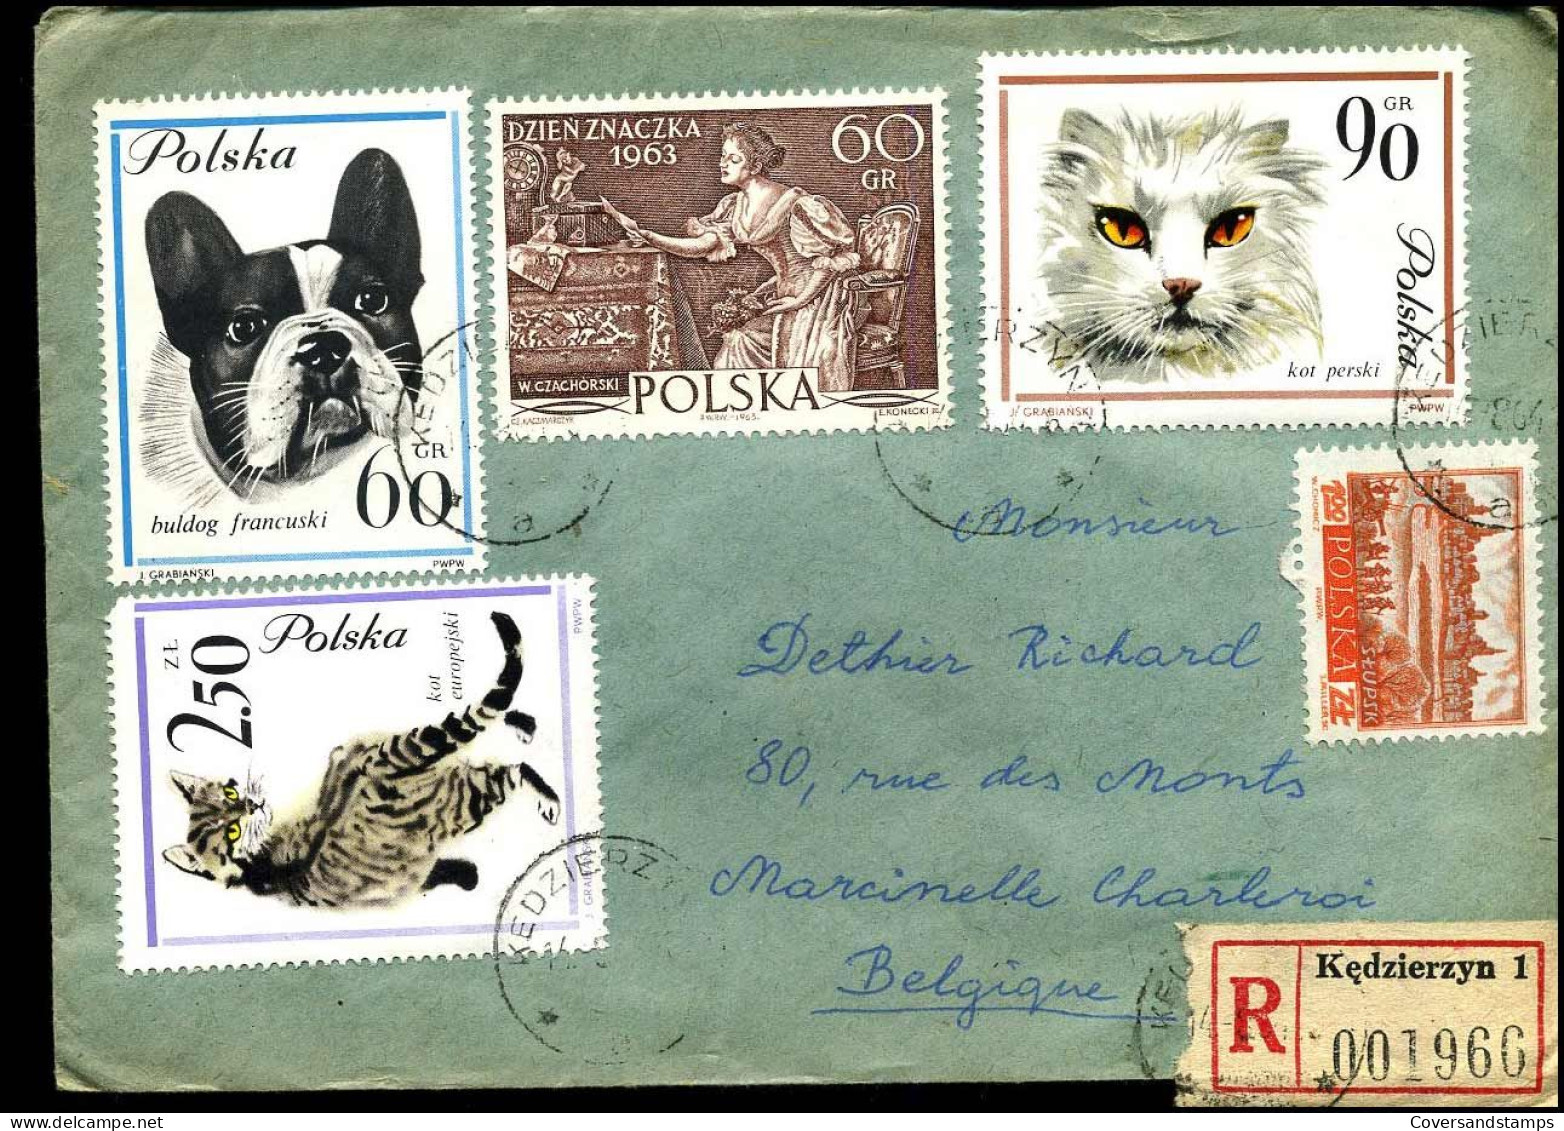 Registered Cover To Marcinelle, Belgium - Covers & Documents